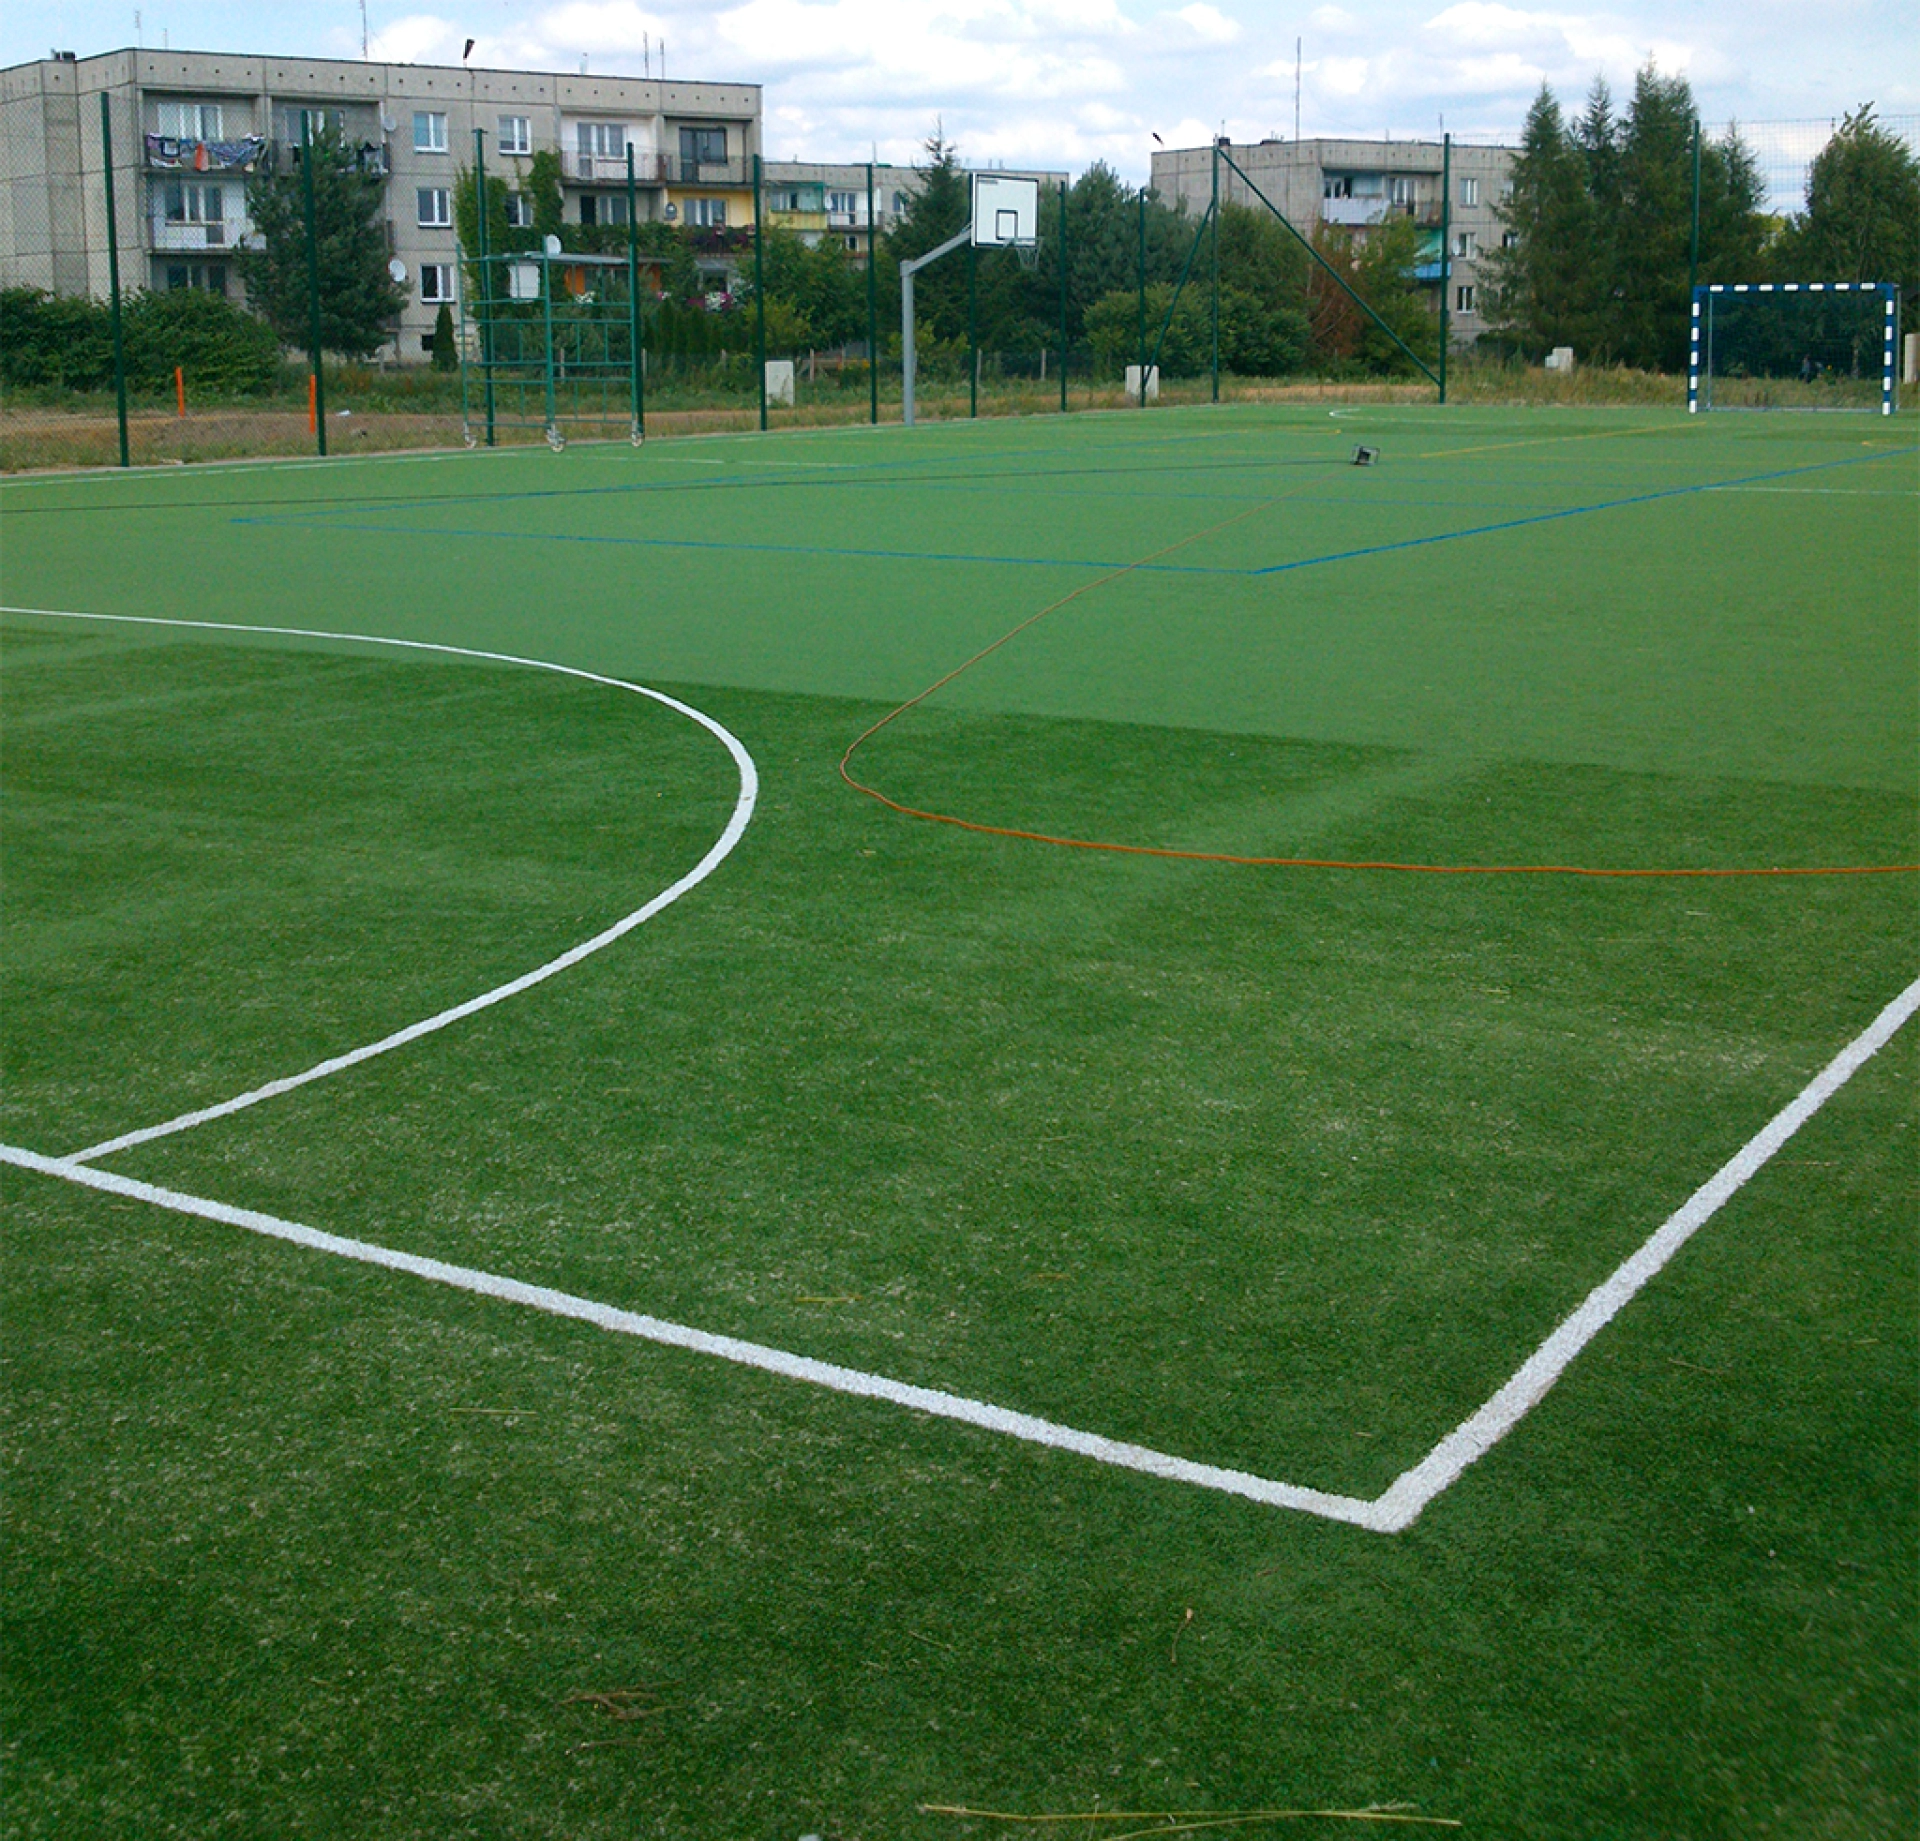 Halls, sports fields and green areas